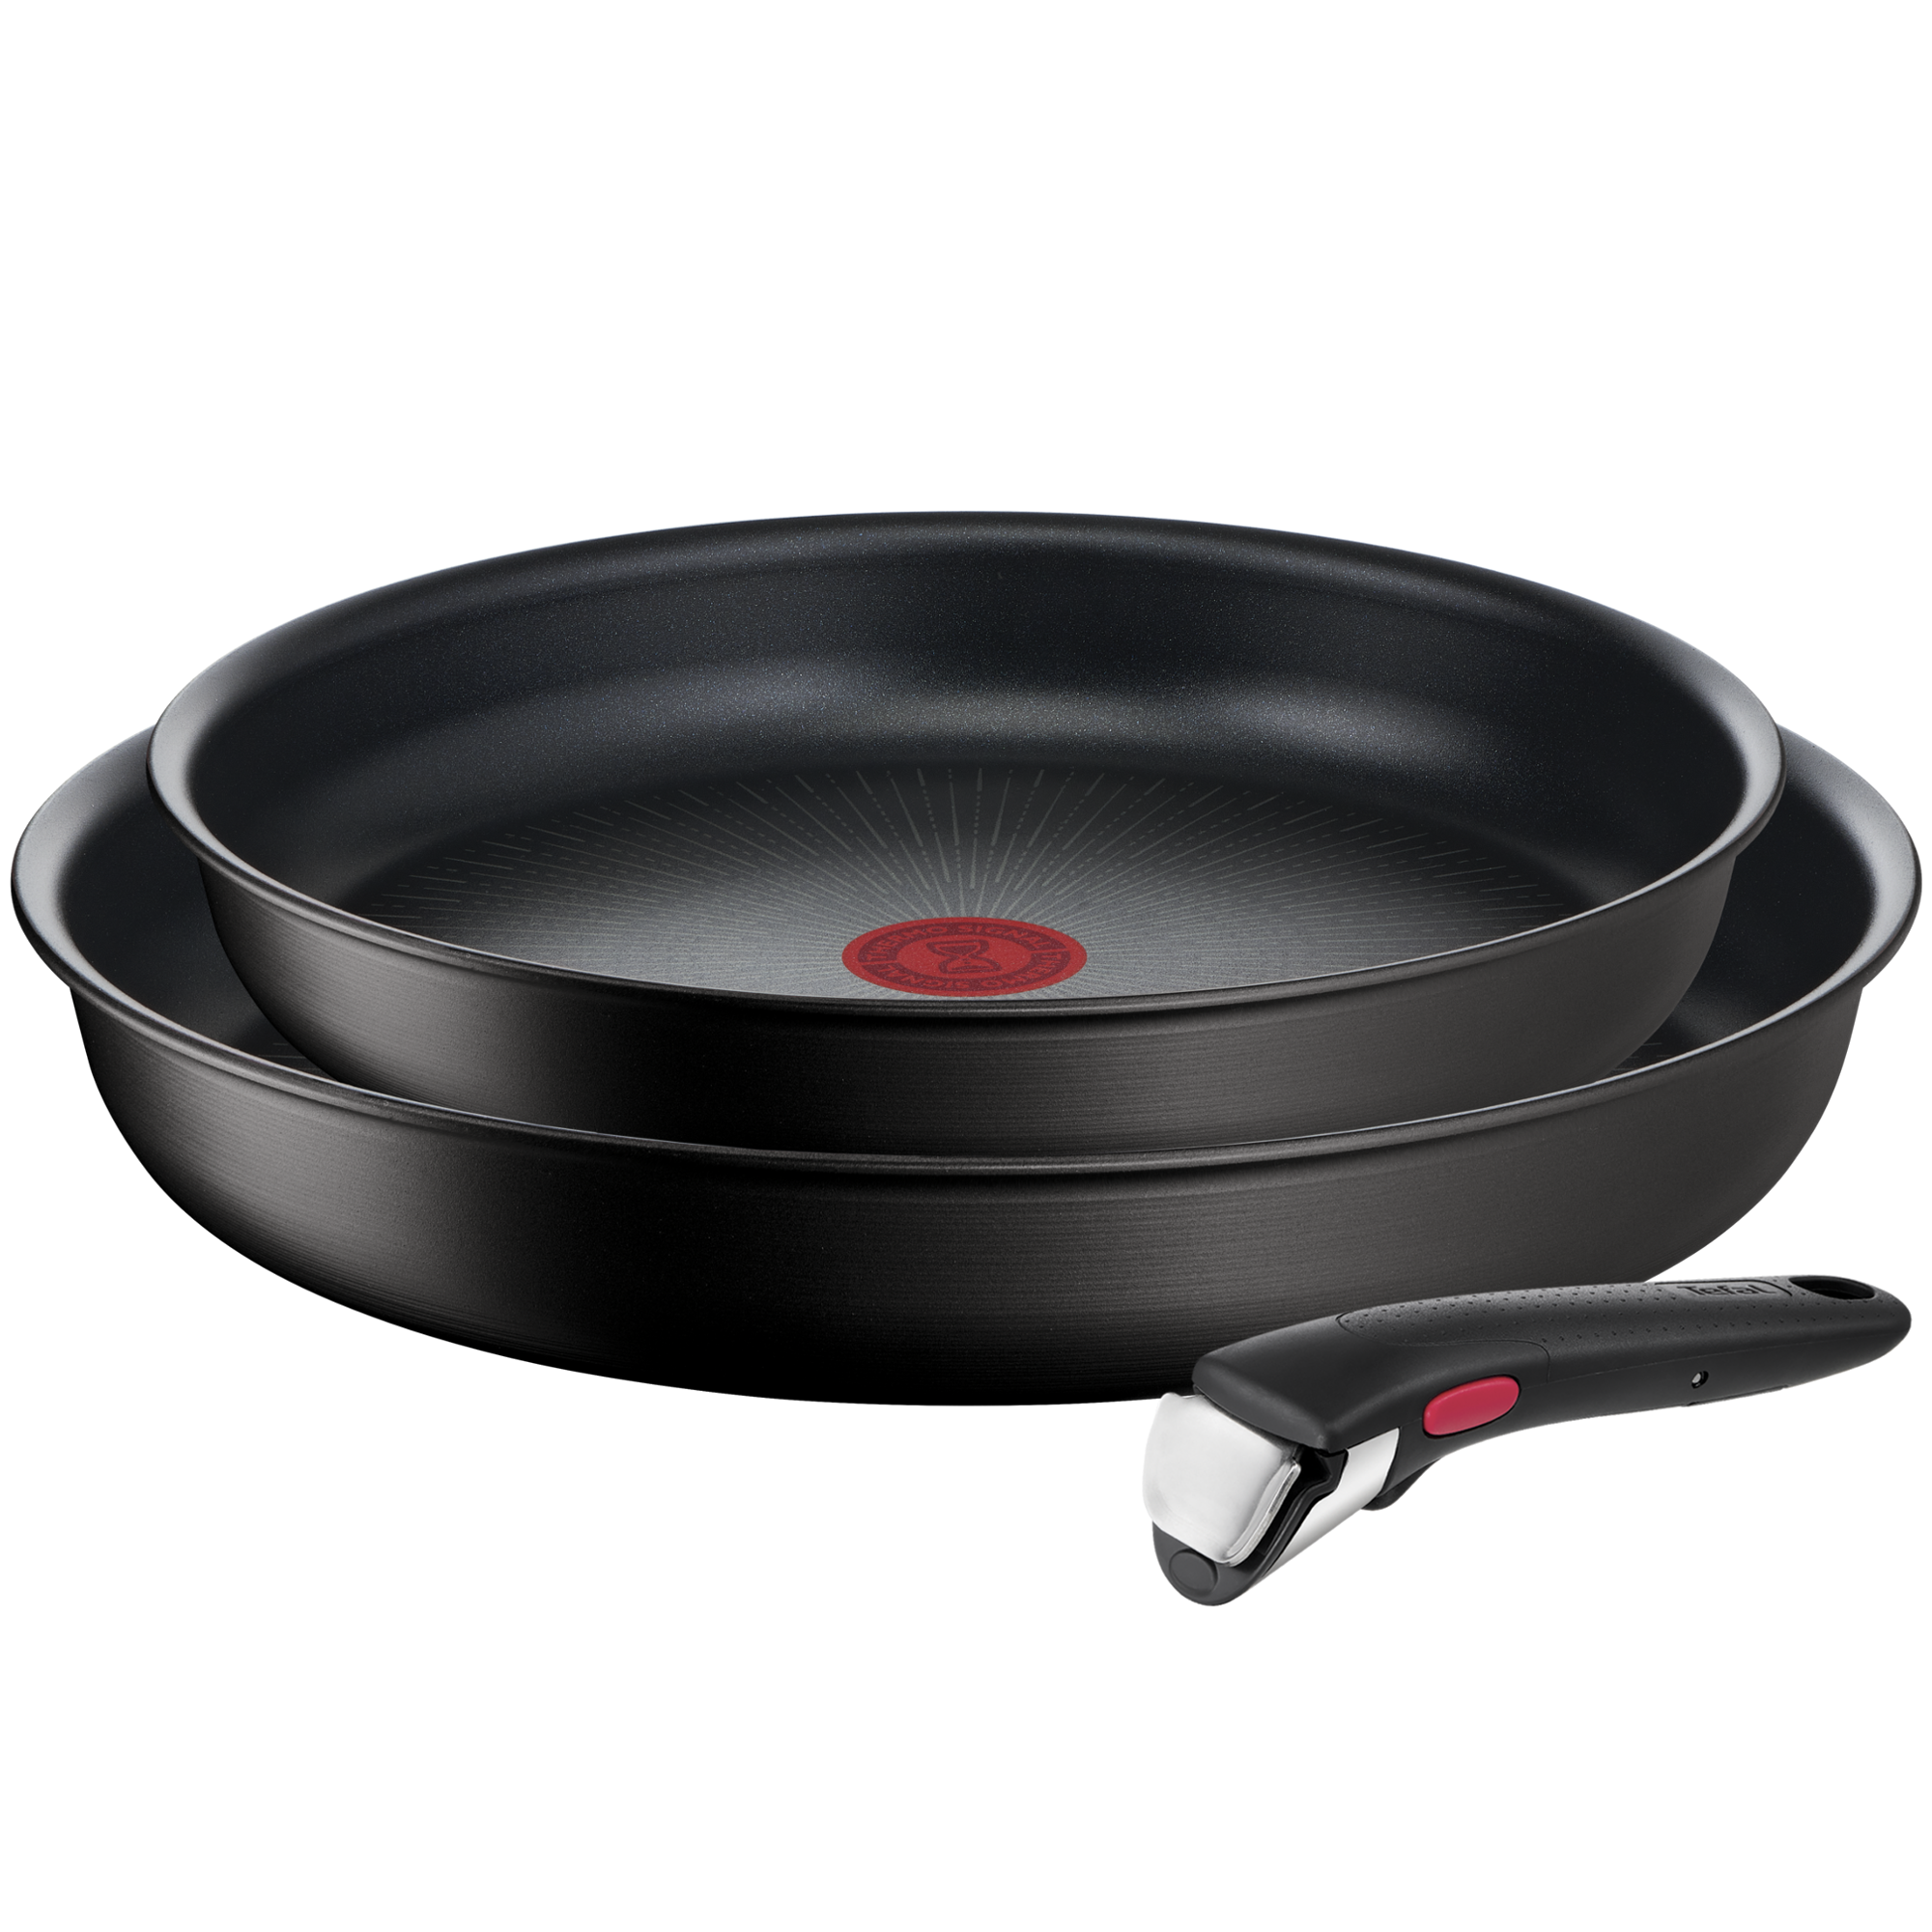 Set of 3 pieces Ingenio (1 pan 24 cm + 1 pan 28 cm + 1 handle) Tefal, with induction